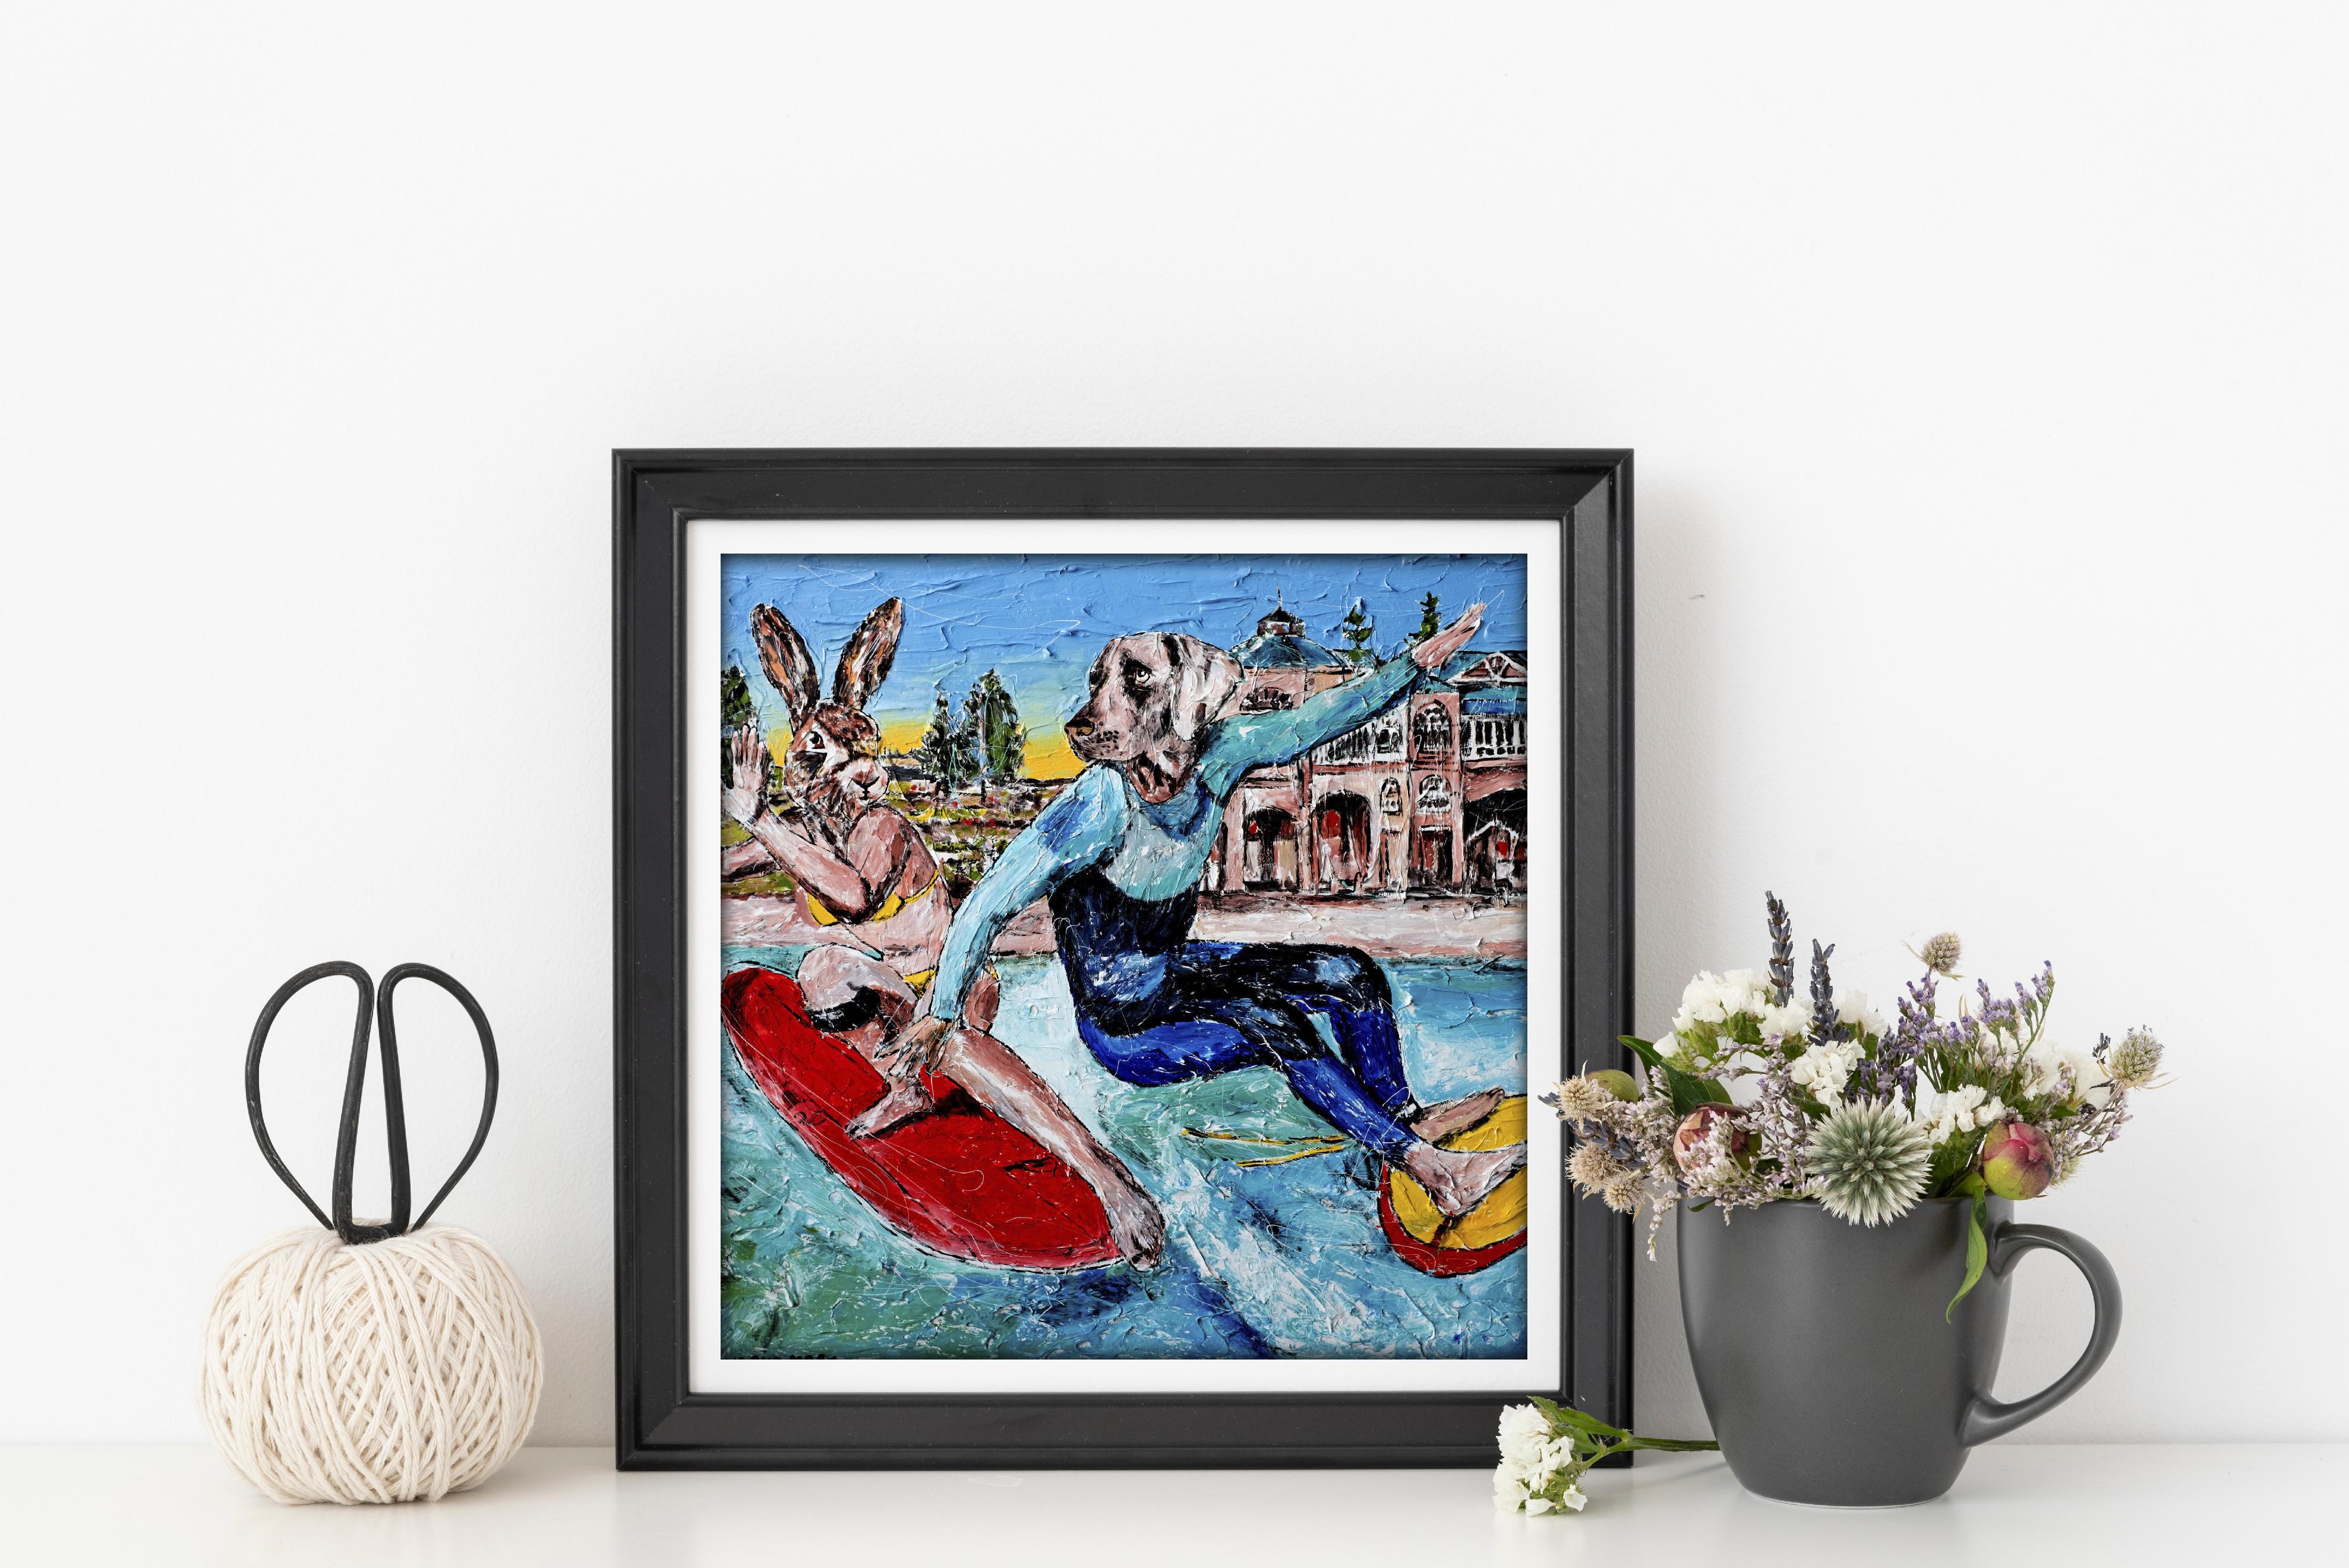 Animal Painting Print - Gillie and Marc - Limited Edition- Art - surf - 2019 For Sale 4